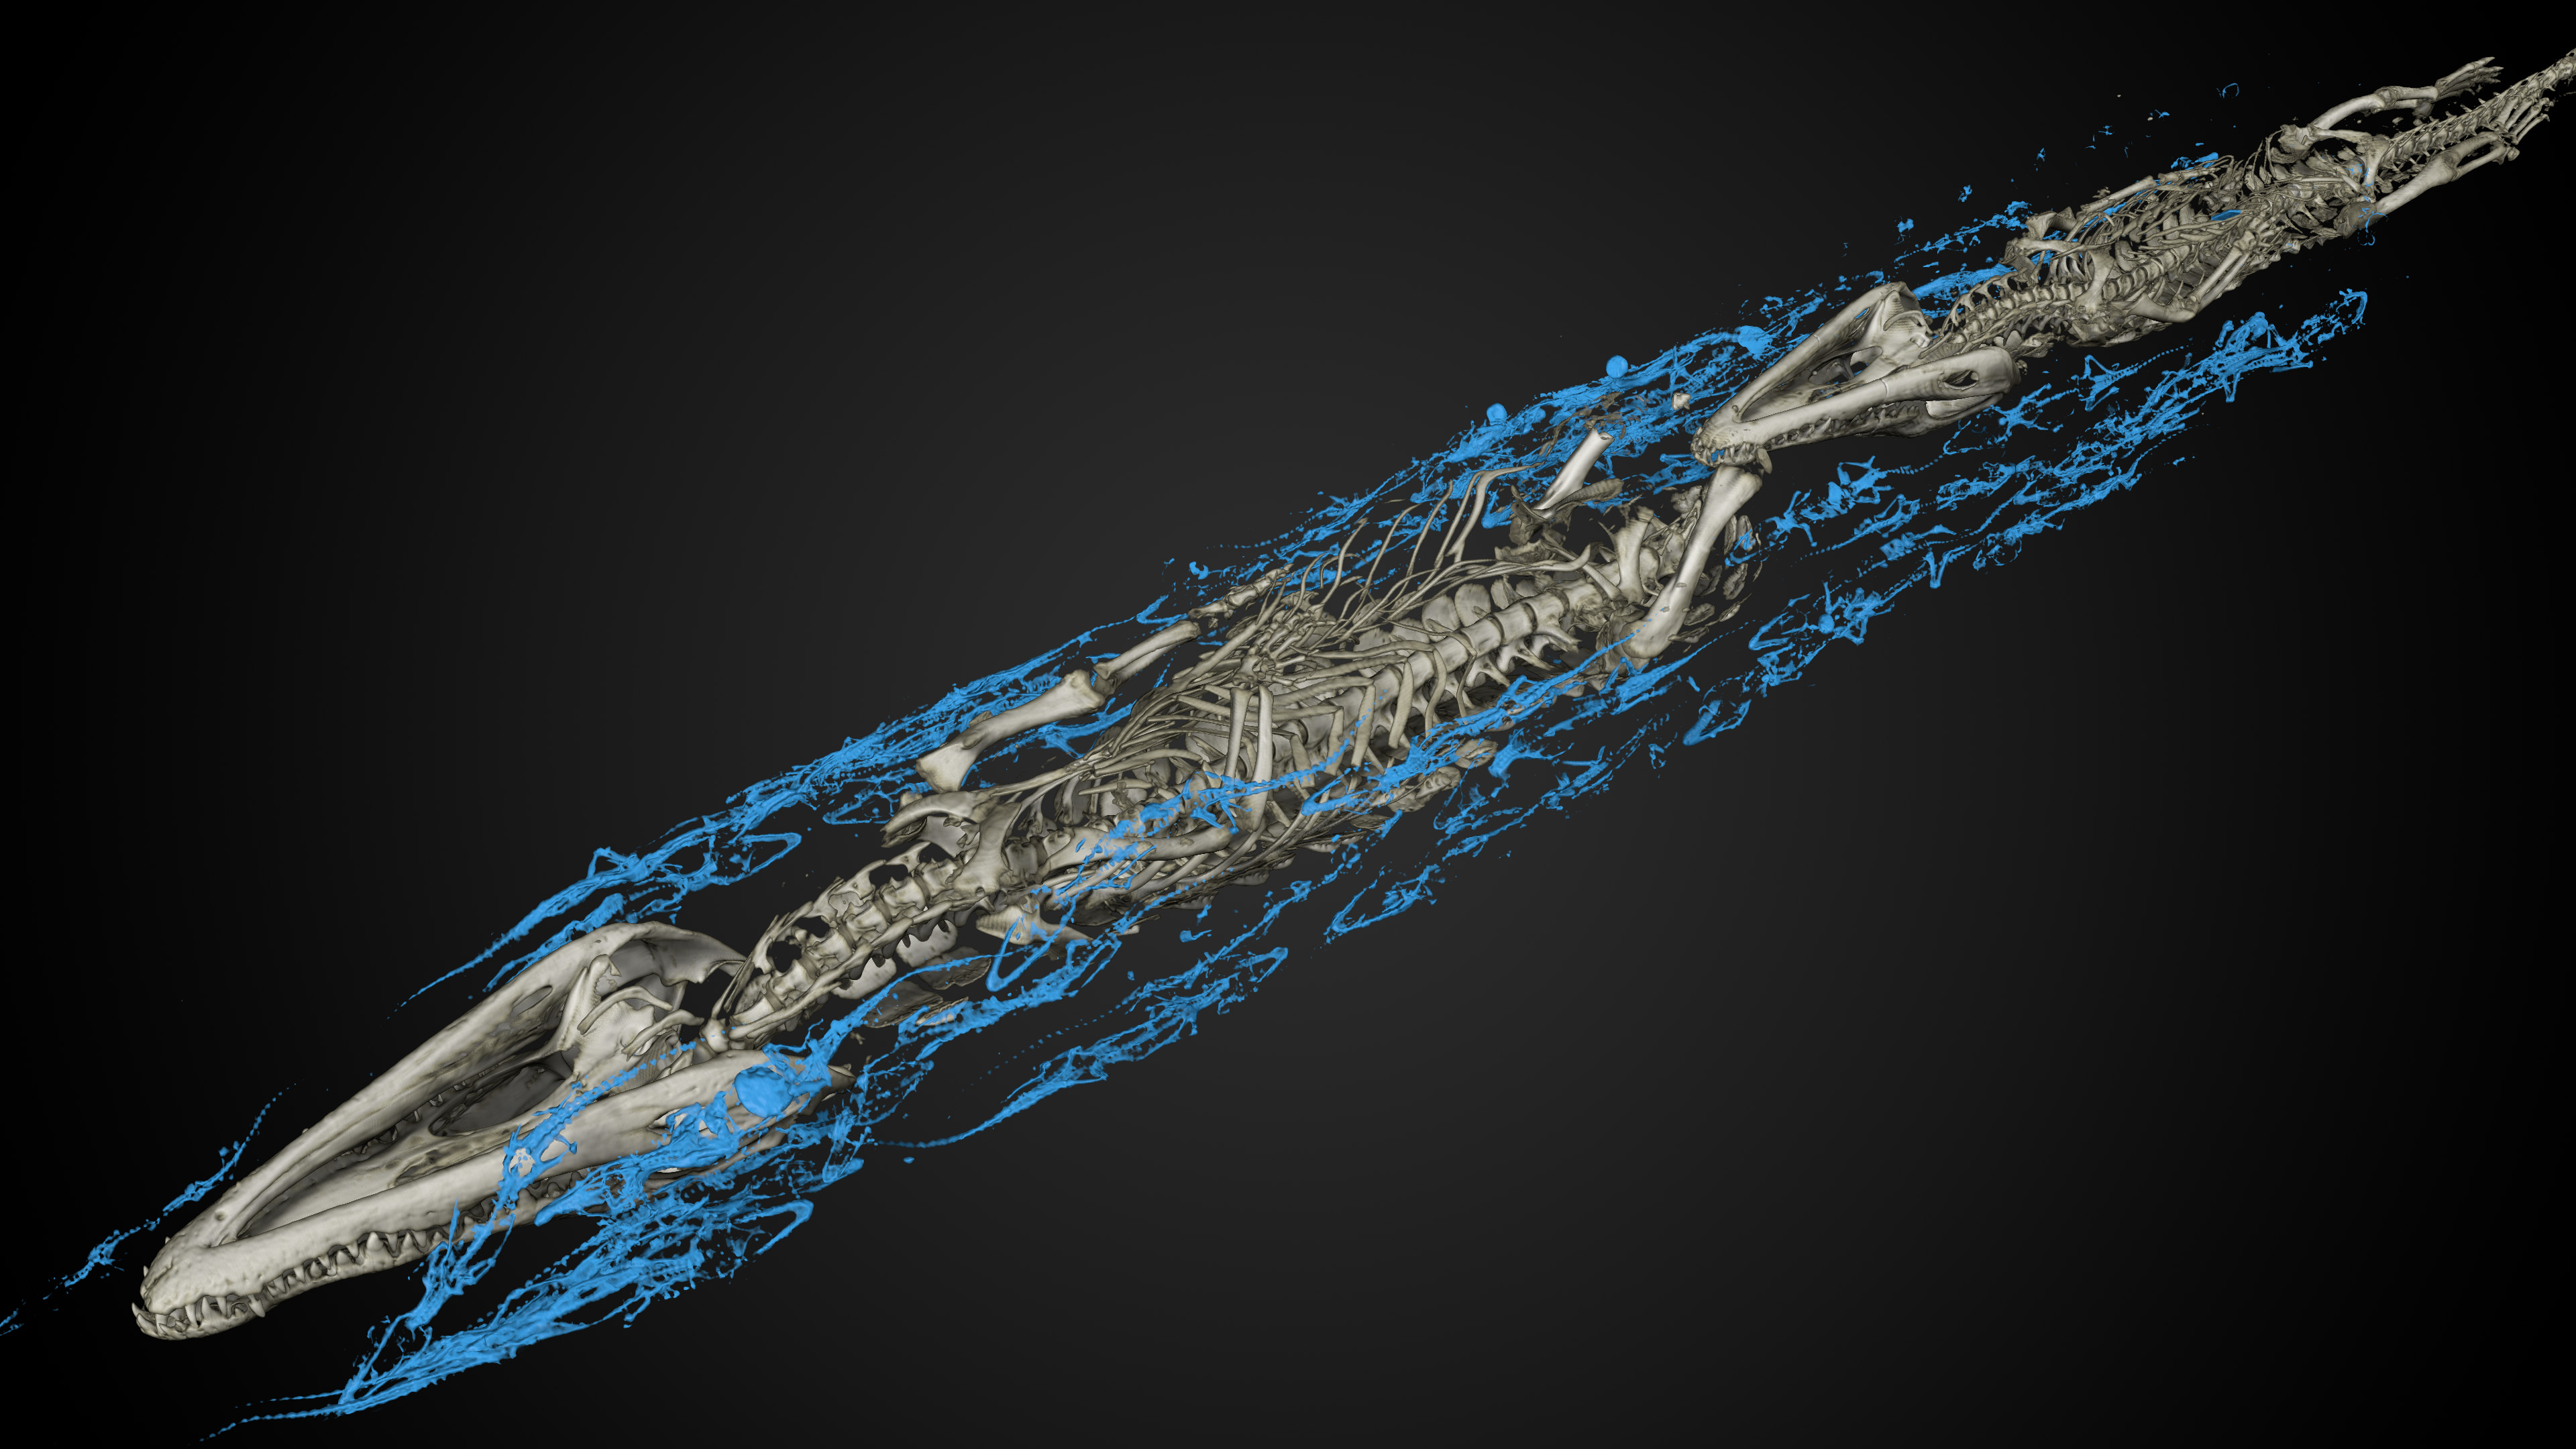 A visualization of the inside of the crocodile mummy. The two adolescent crocodiles are gray, while the babies are rendered in blue. Image courtesy Interspectral.